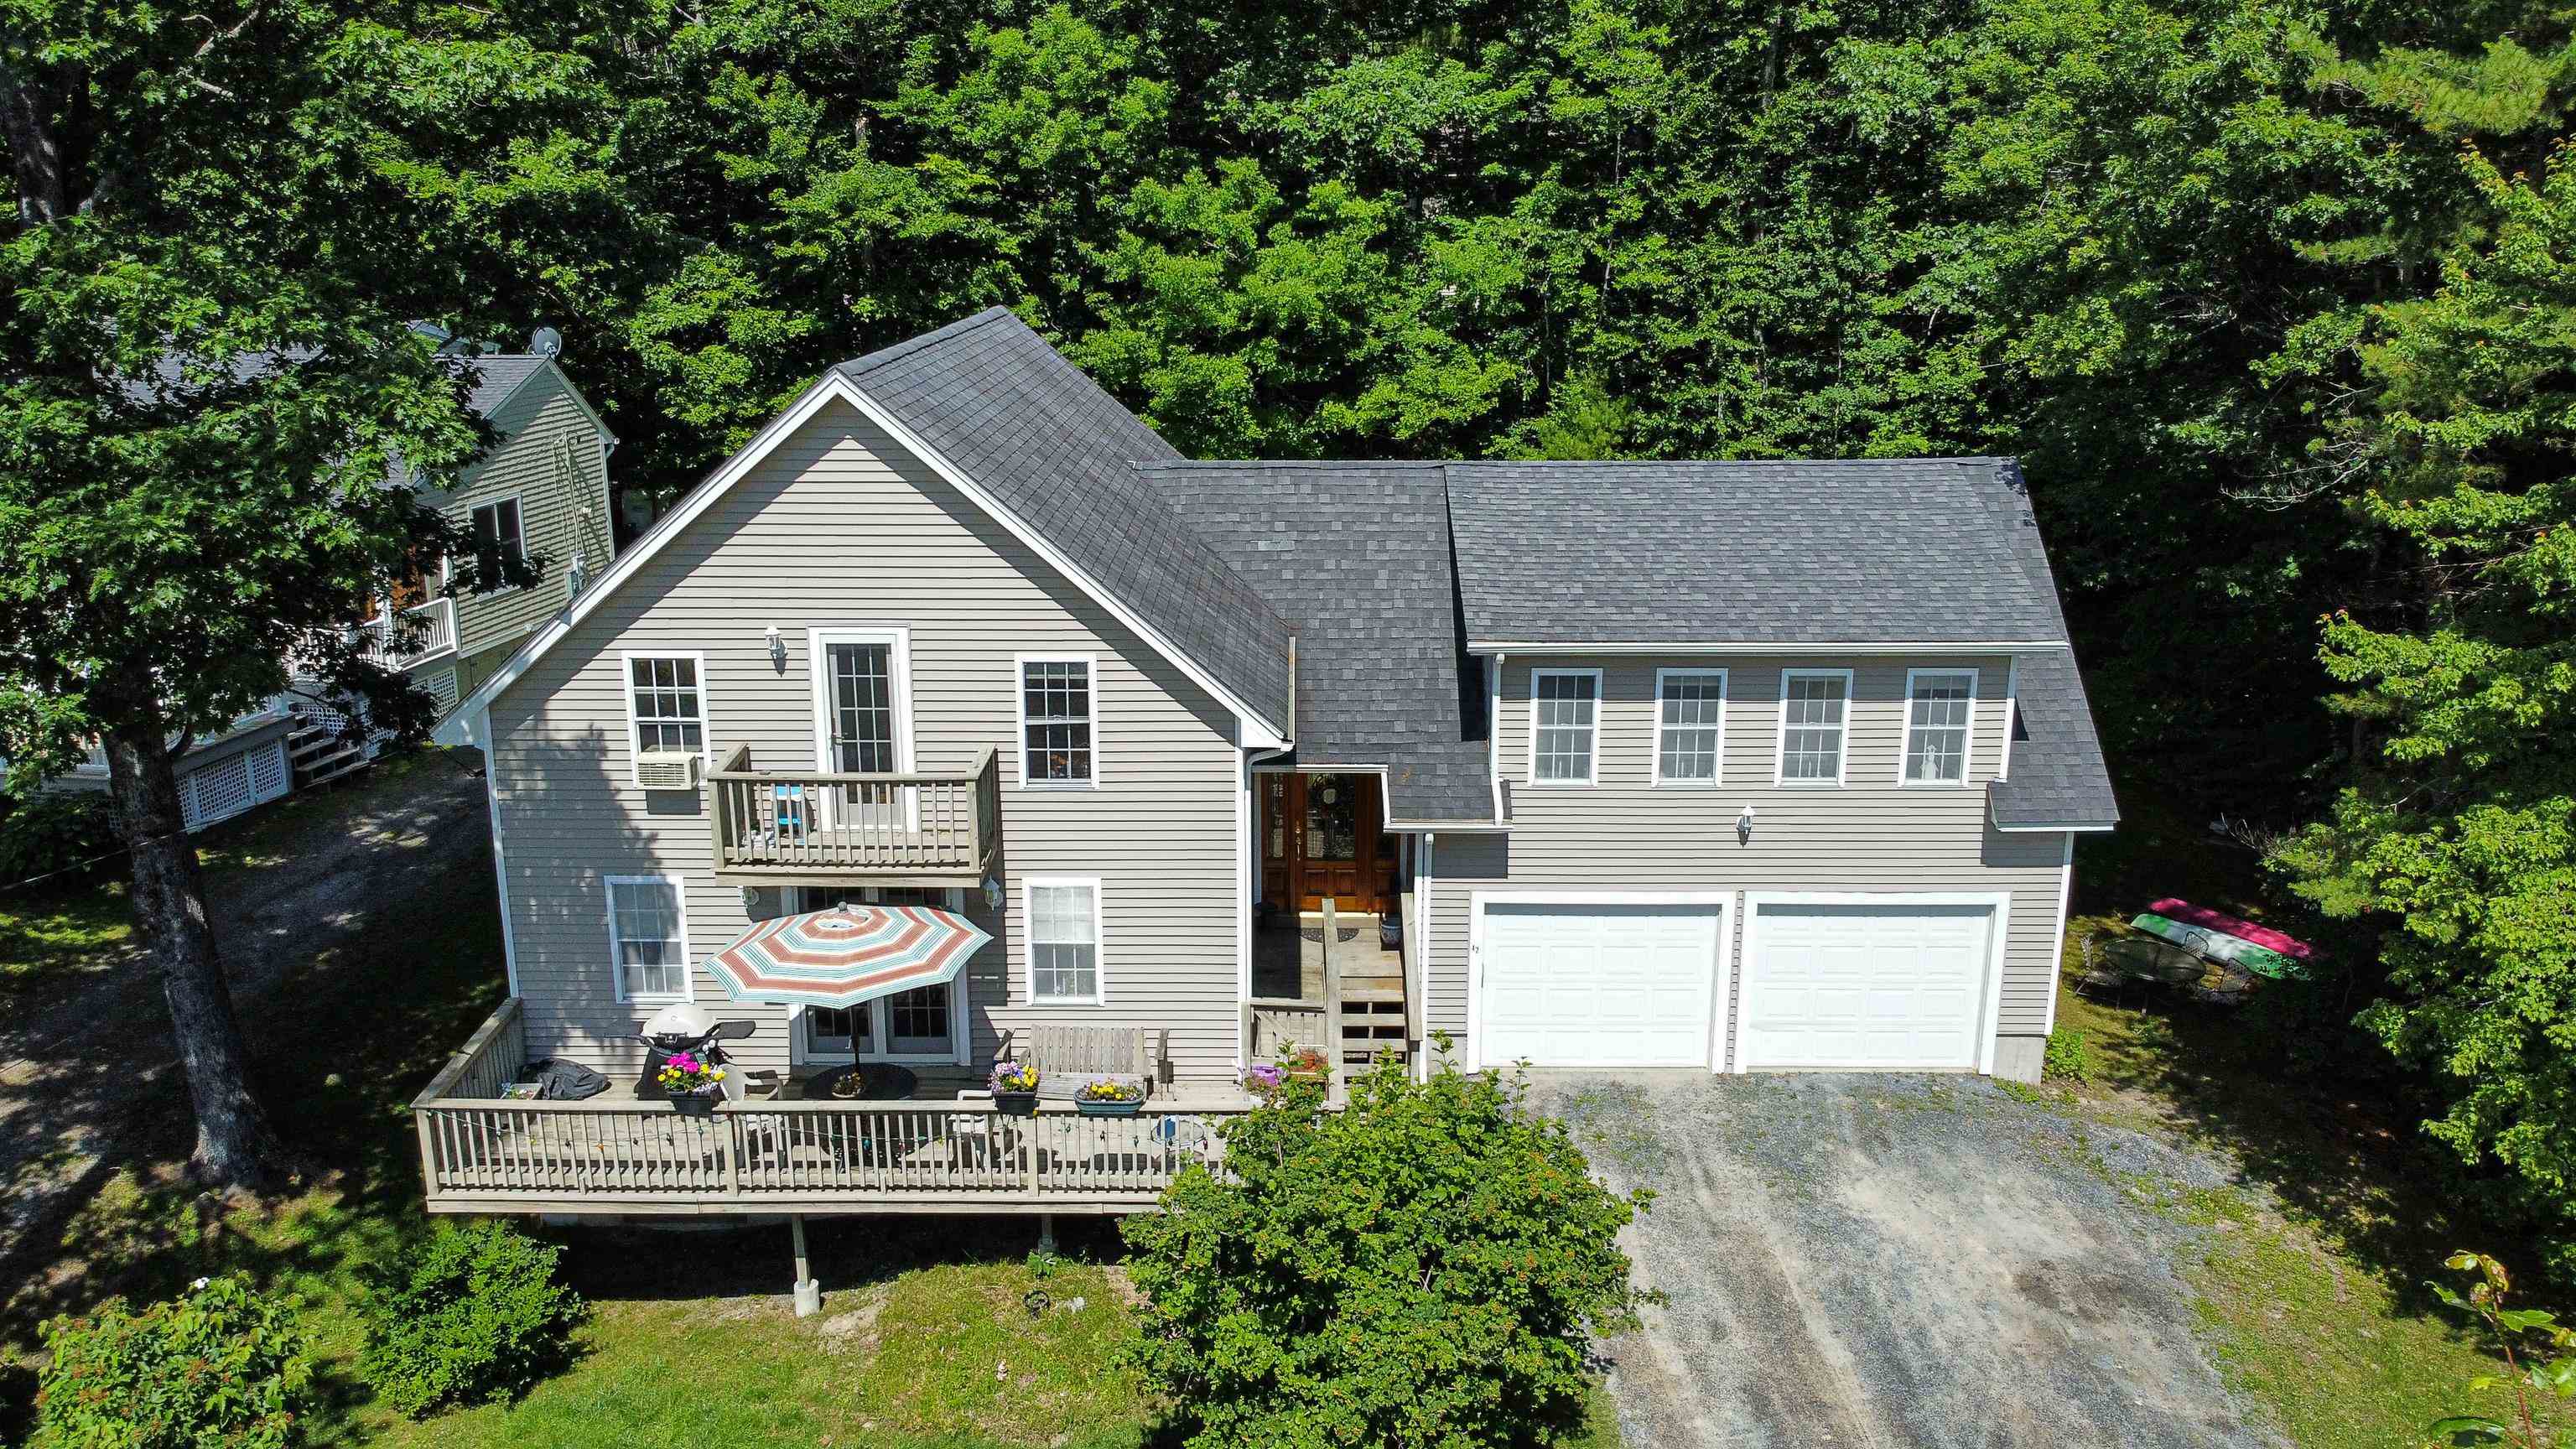 42 Cove Woods Road, Stoddard, NH 03464